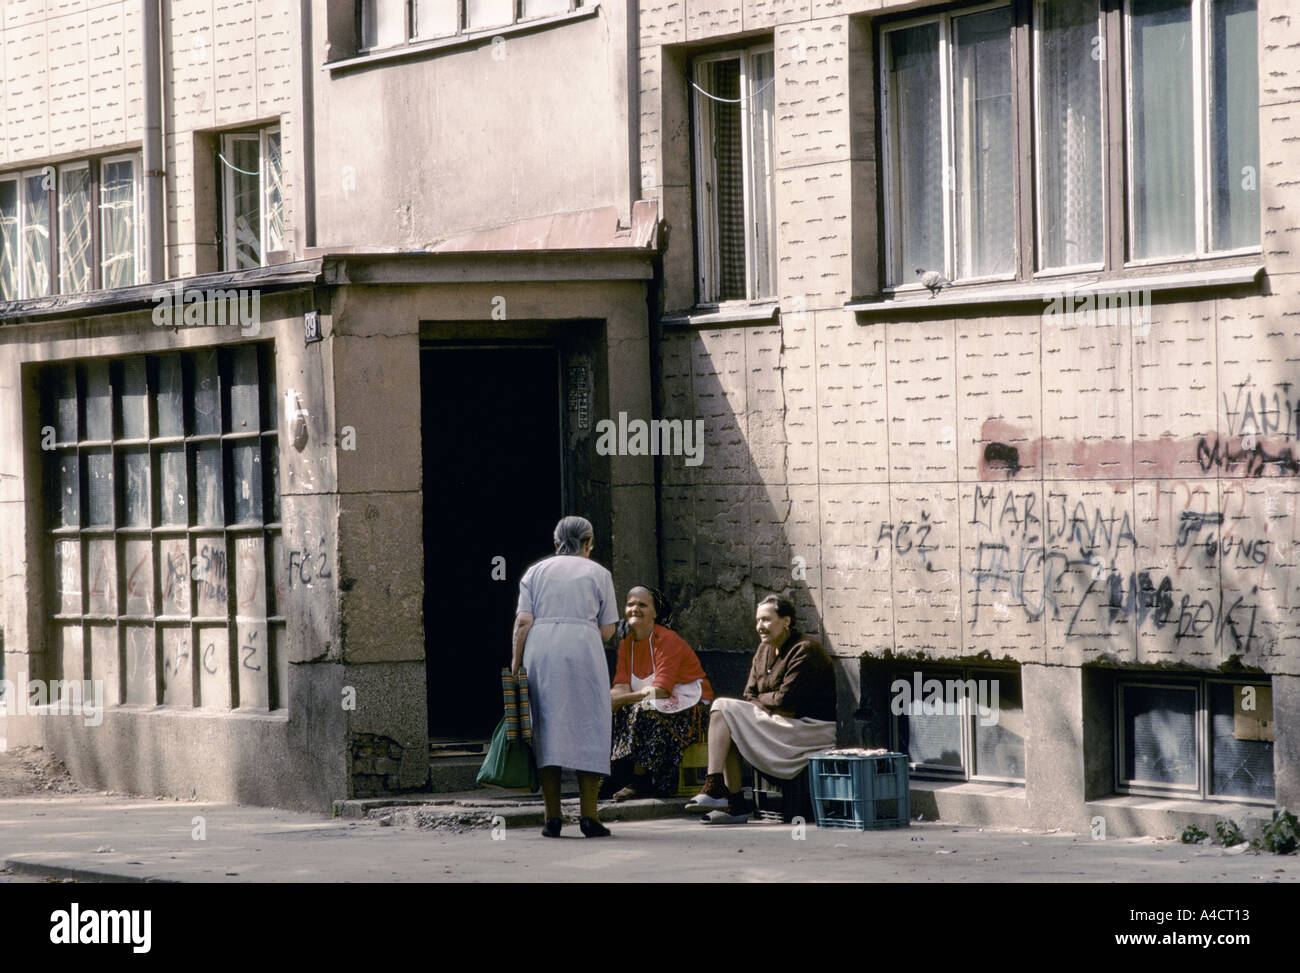 Women talking  - most of the civilians who remain in Grbavica, Serb-controlled  Saravejo,  have no where else to go. Sept 1992 Stock Photo